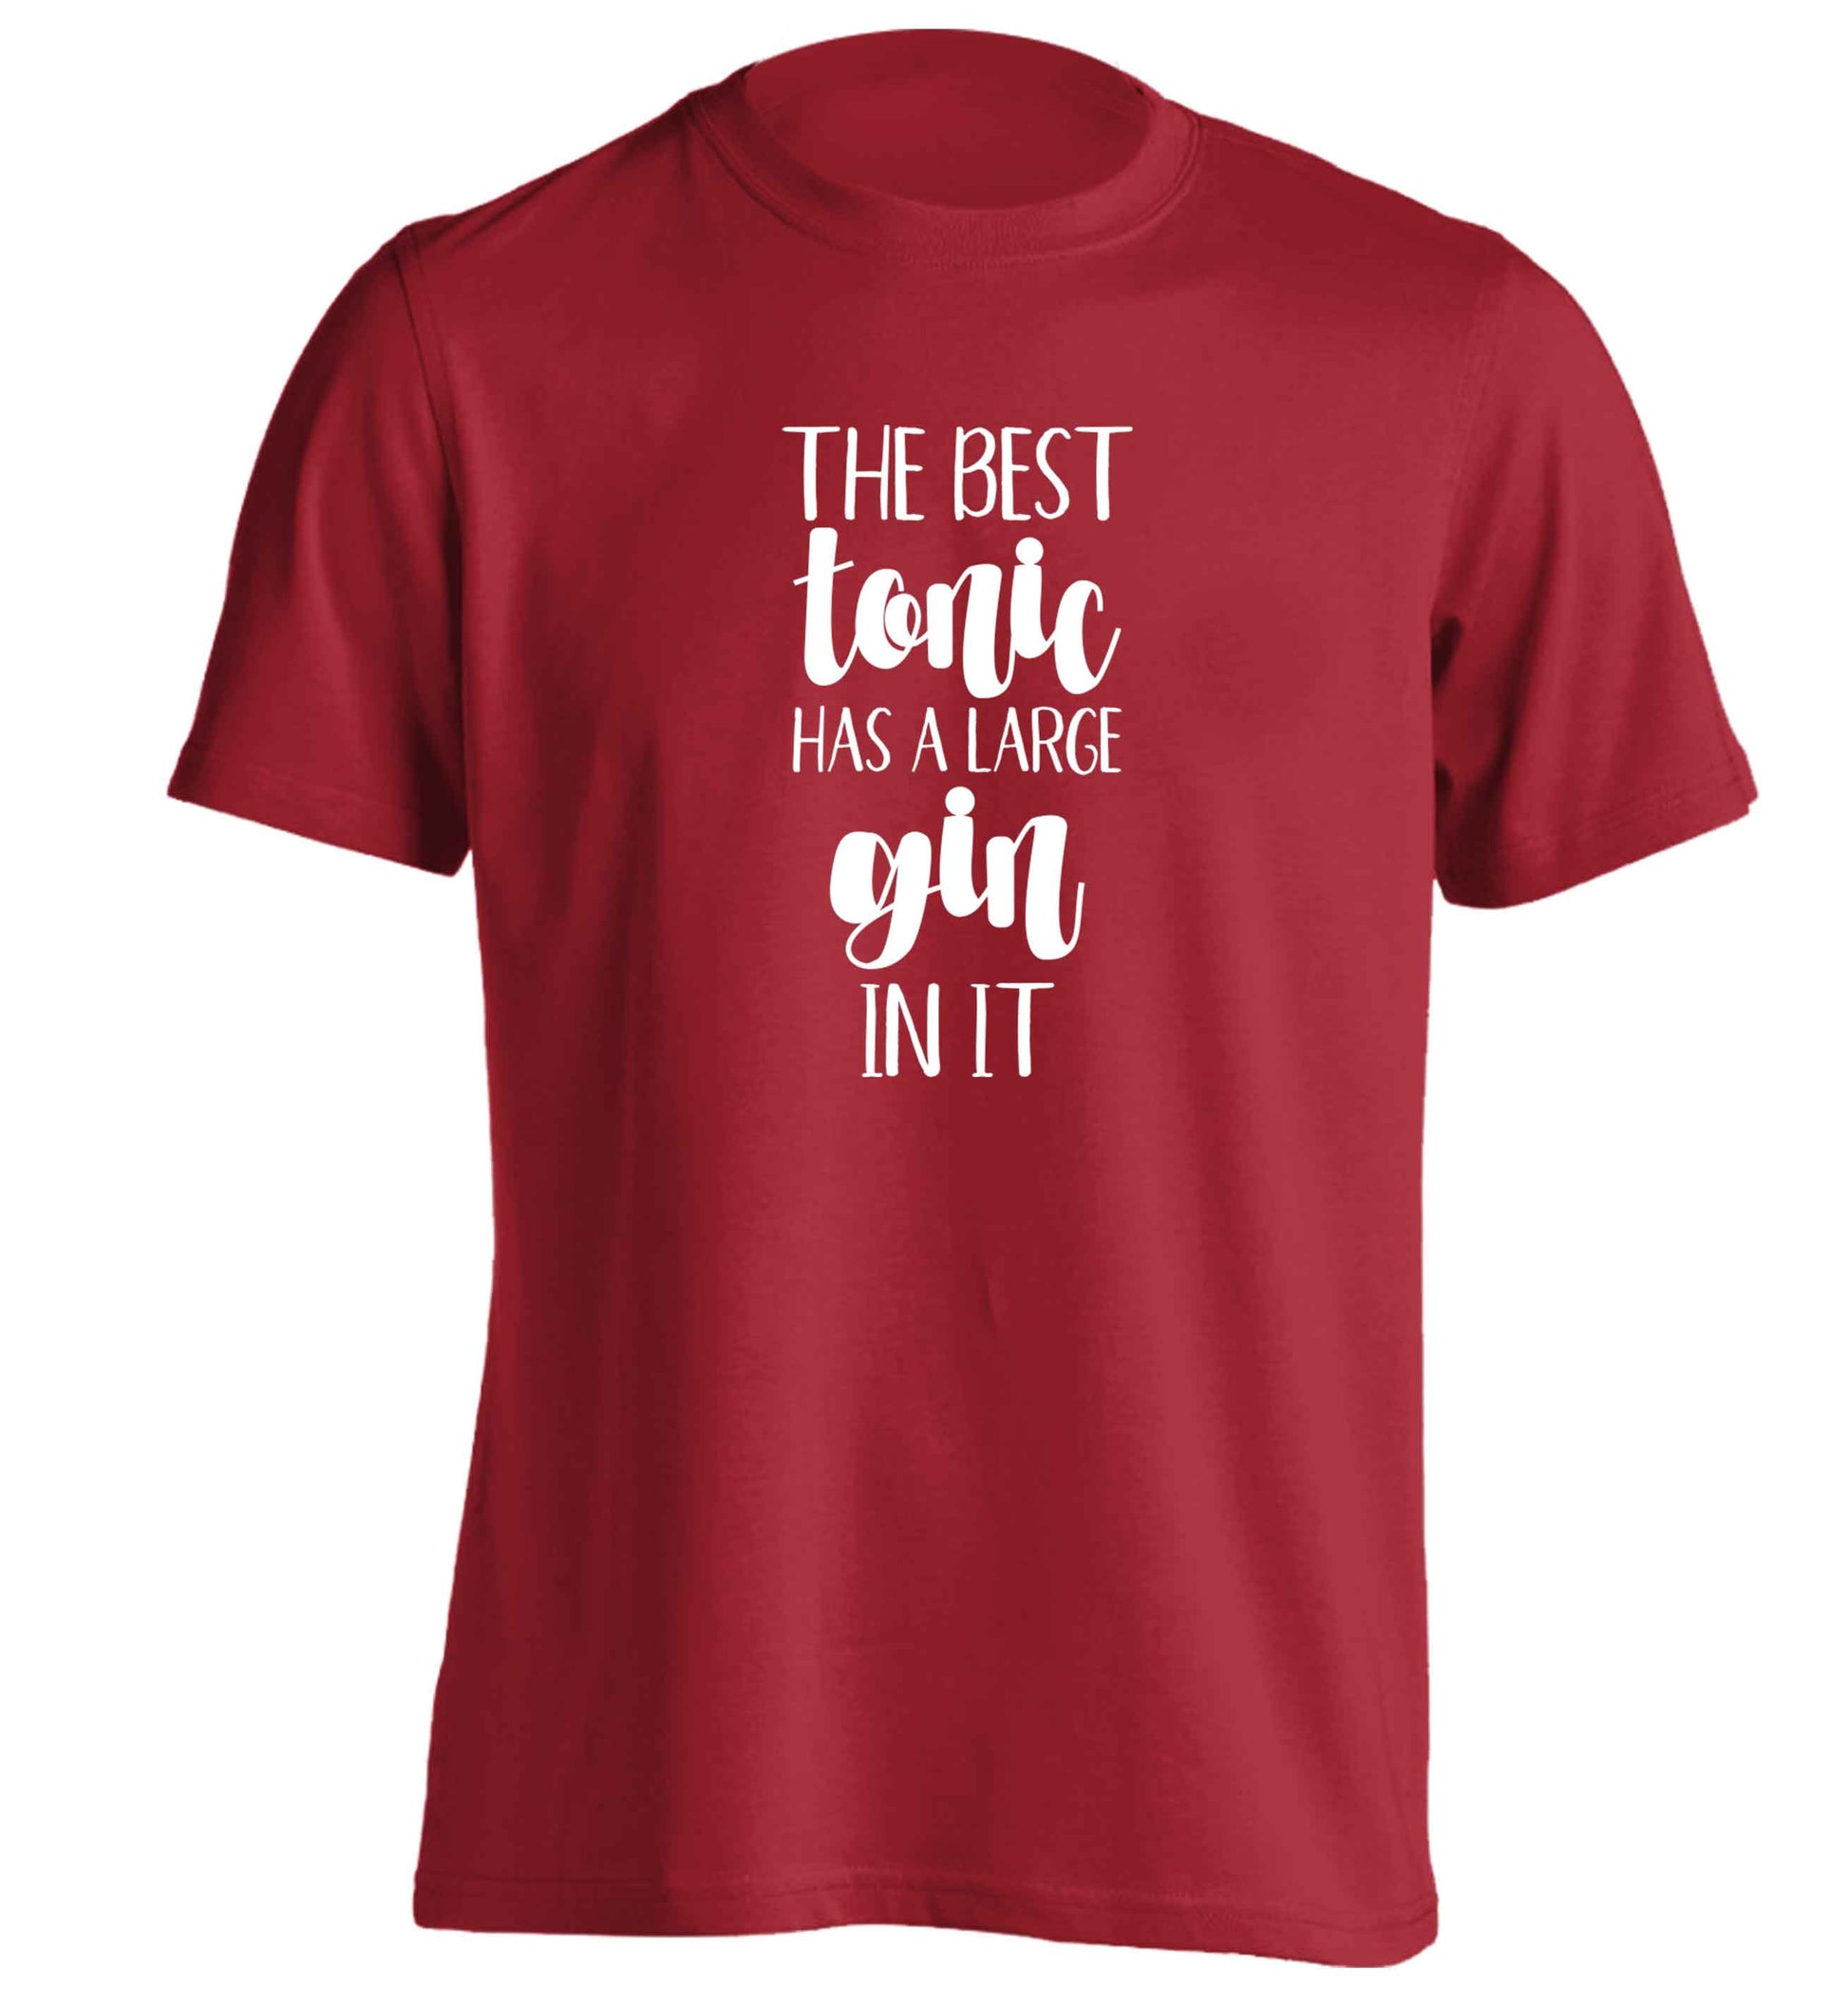 The best tonic has a large gin in it adults unisex red Tshirt 2XL